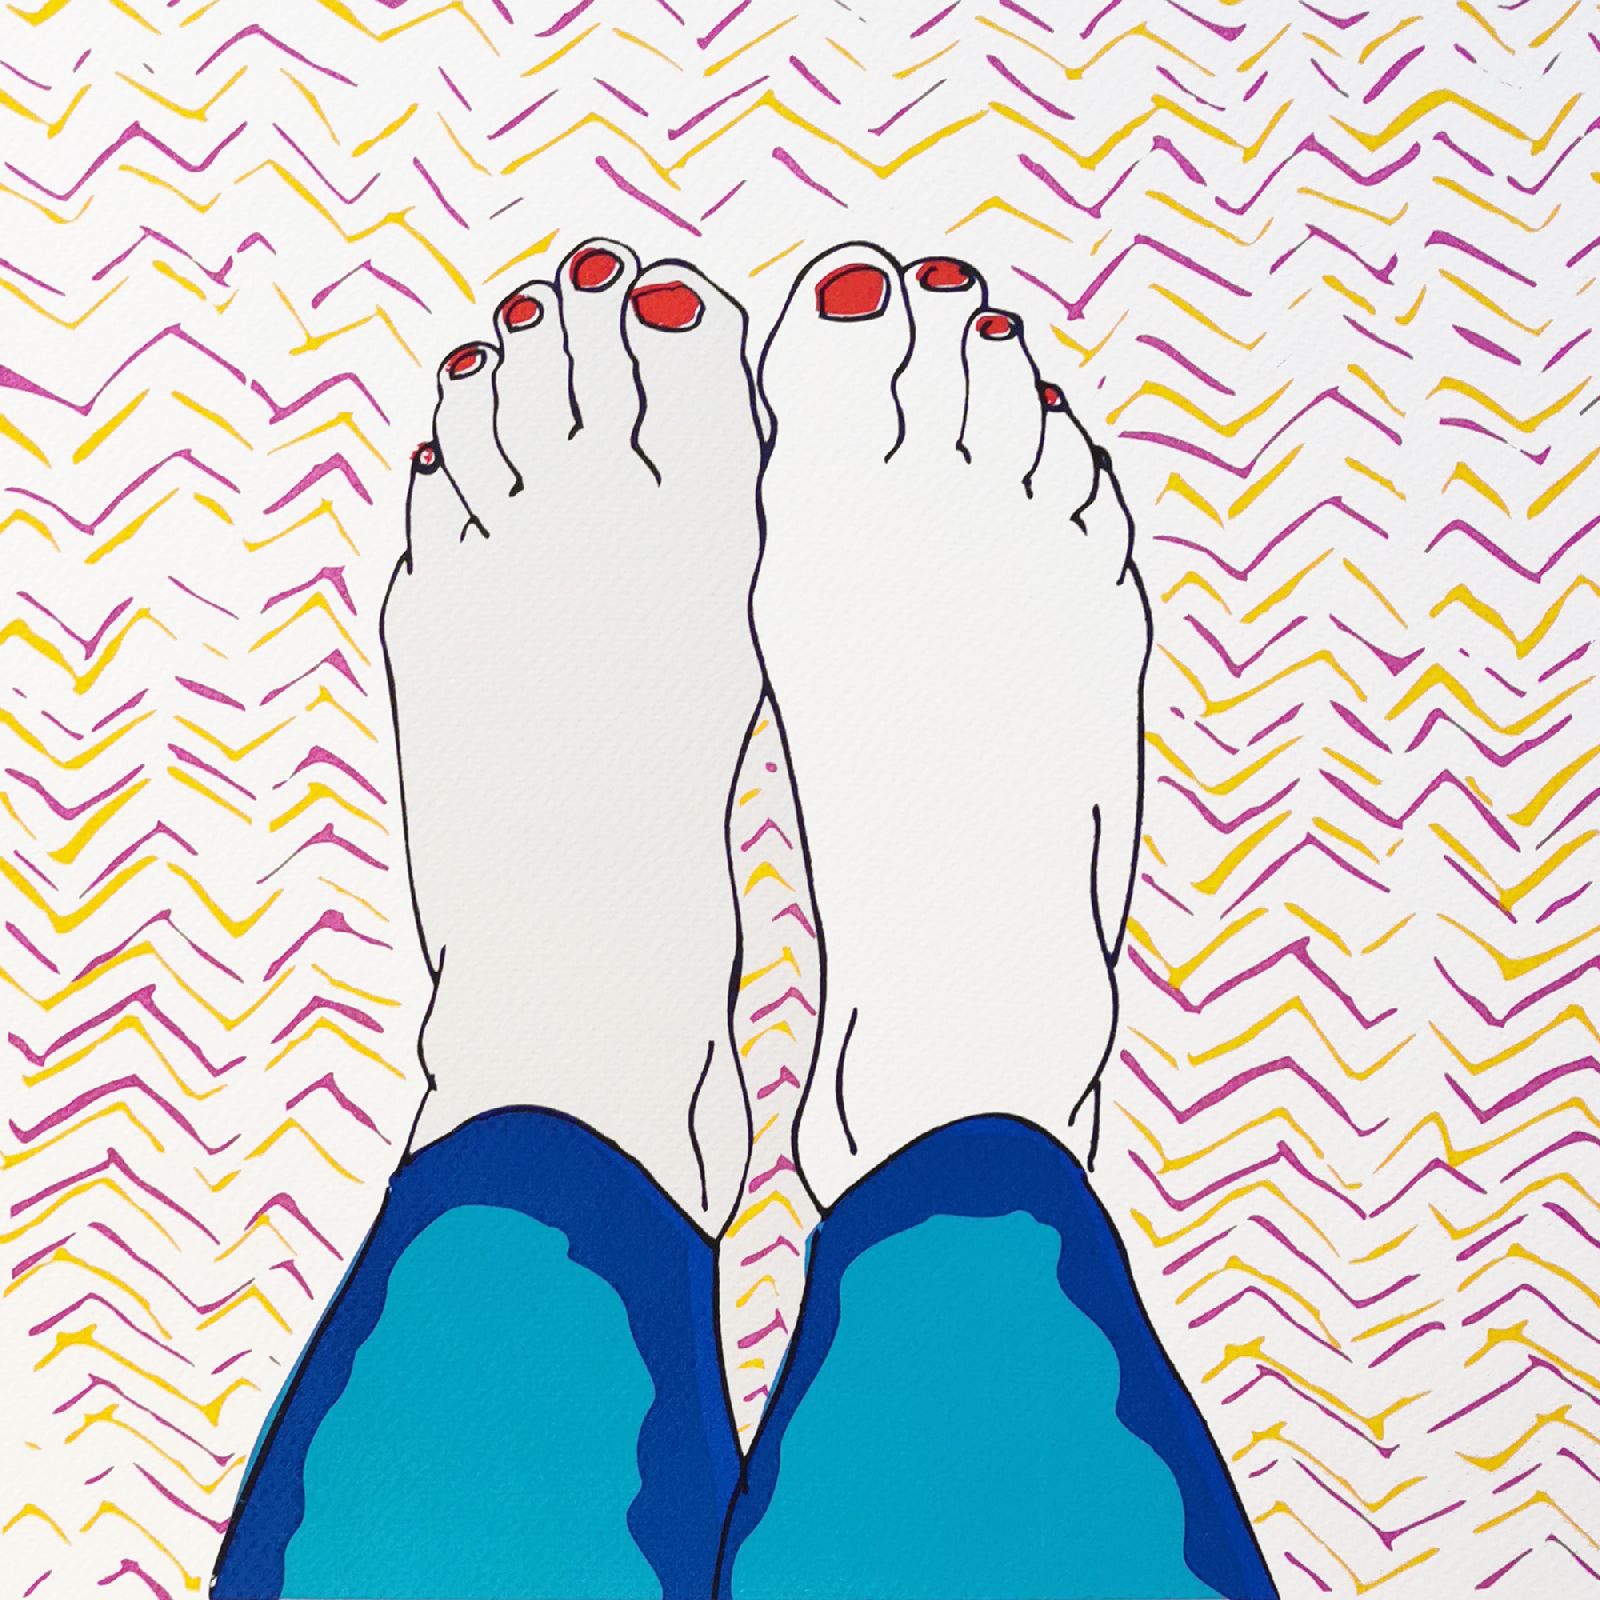 I See My Feet In Front of Me by Ayelet Lalor